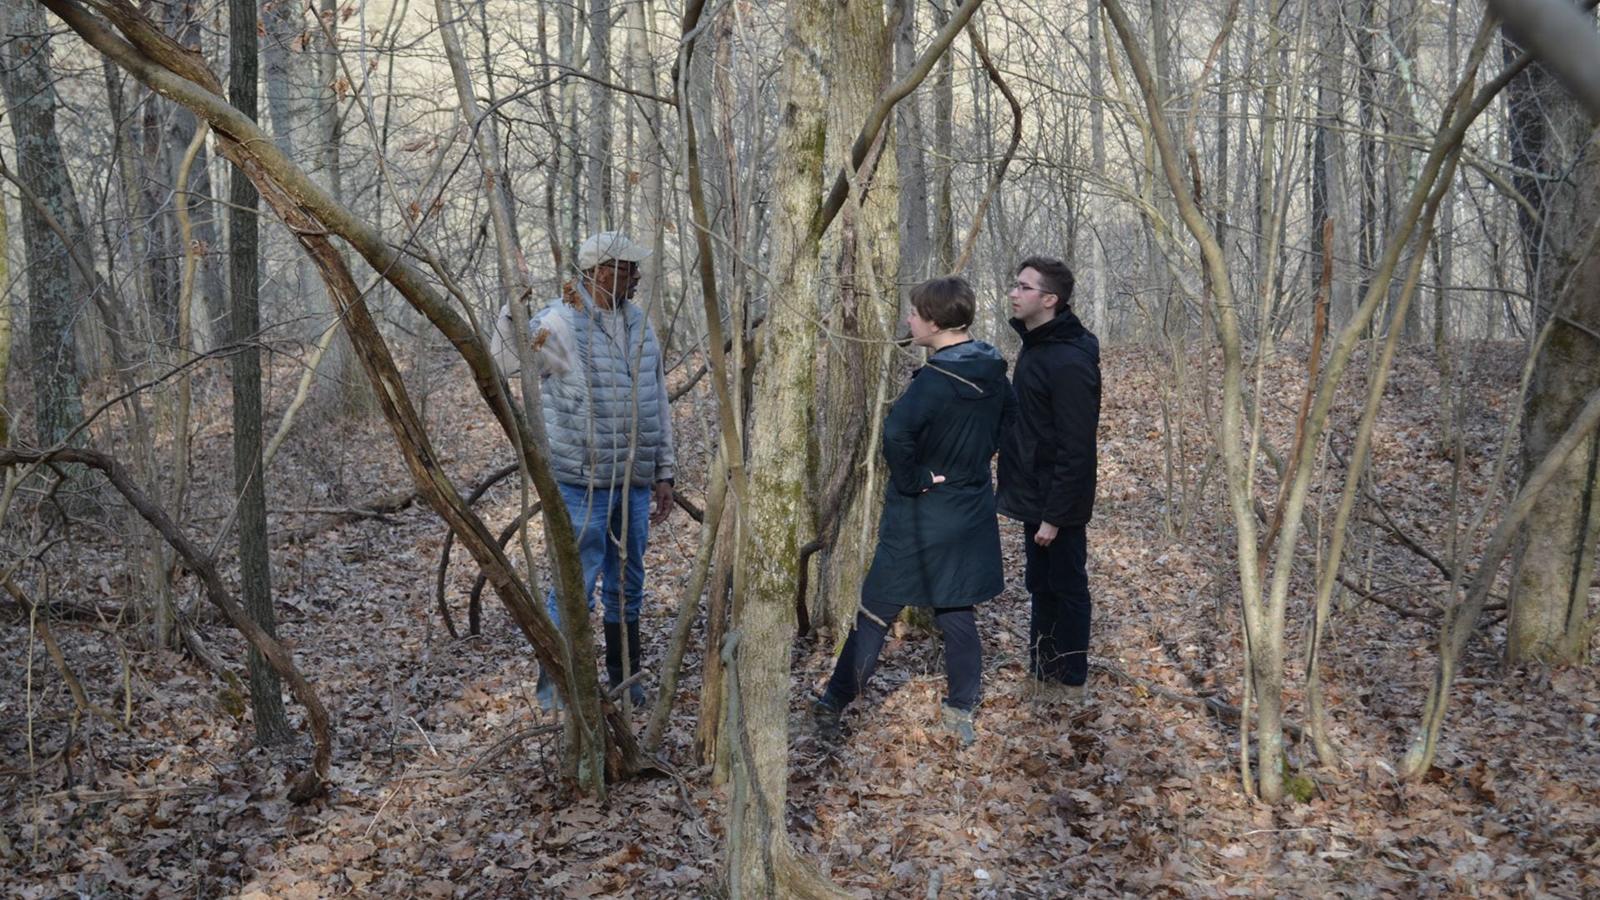 Harry, Lydia, and Jacob in conversation in the woods behind the cemetery.